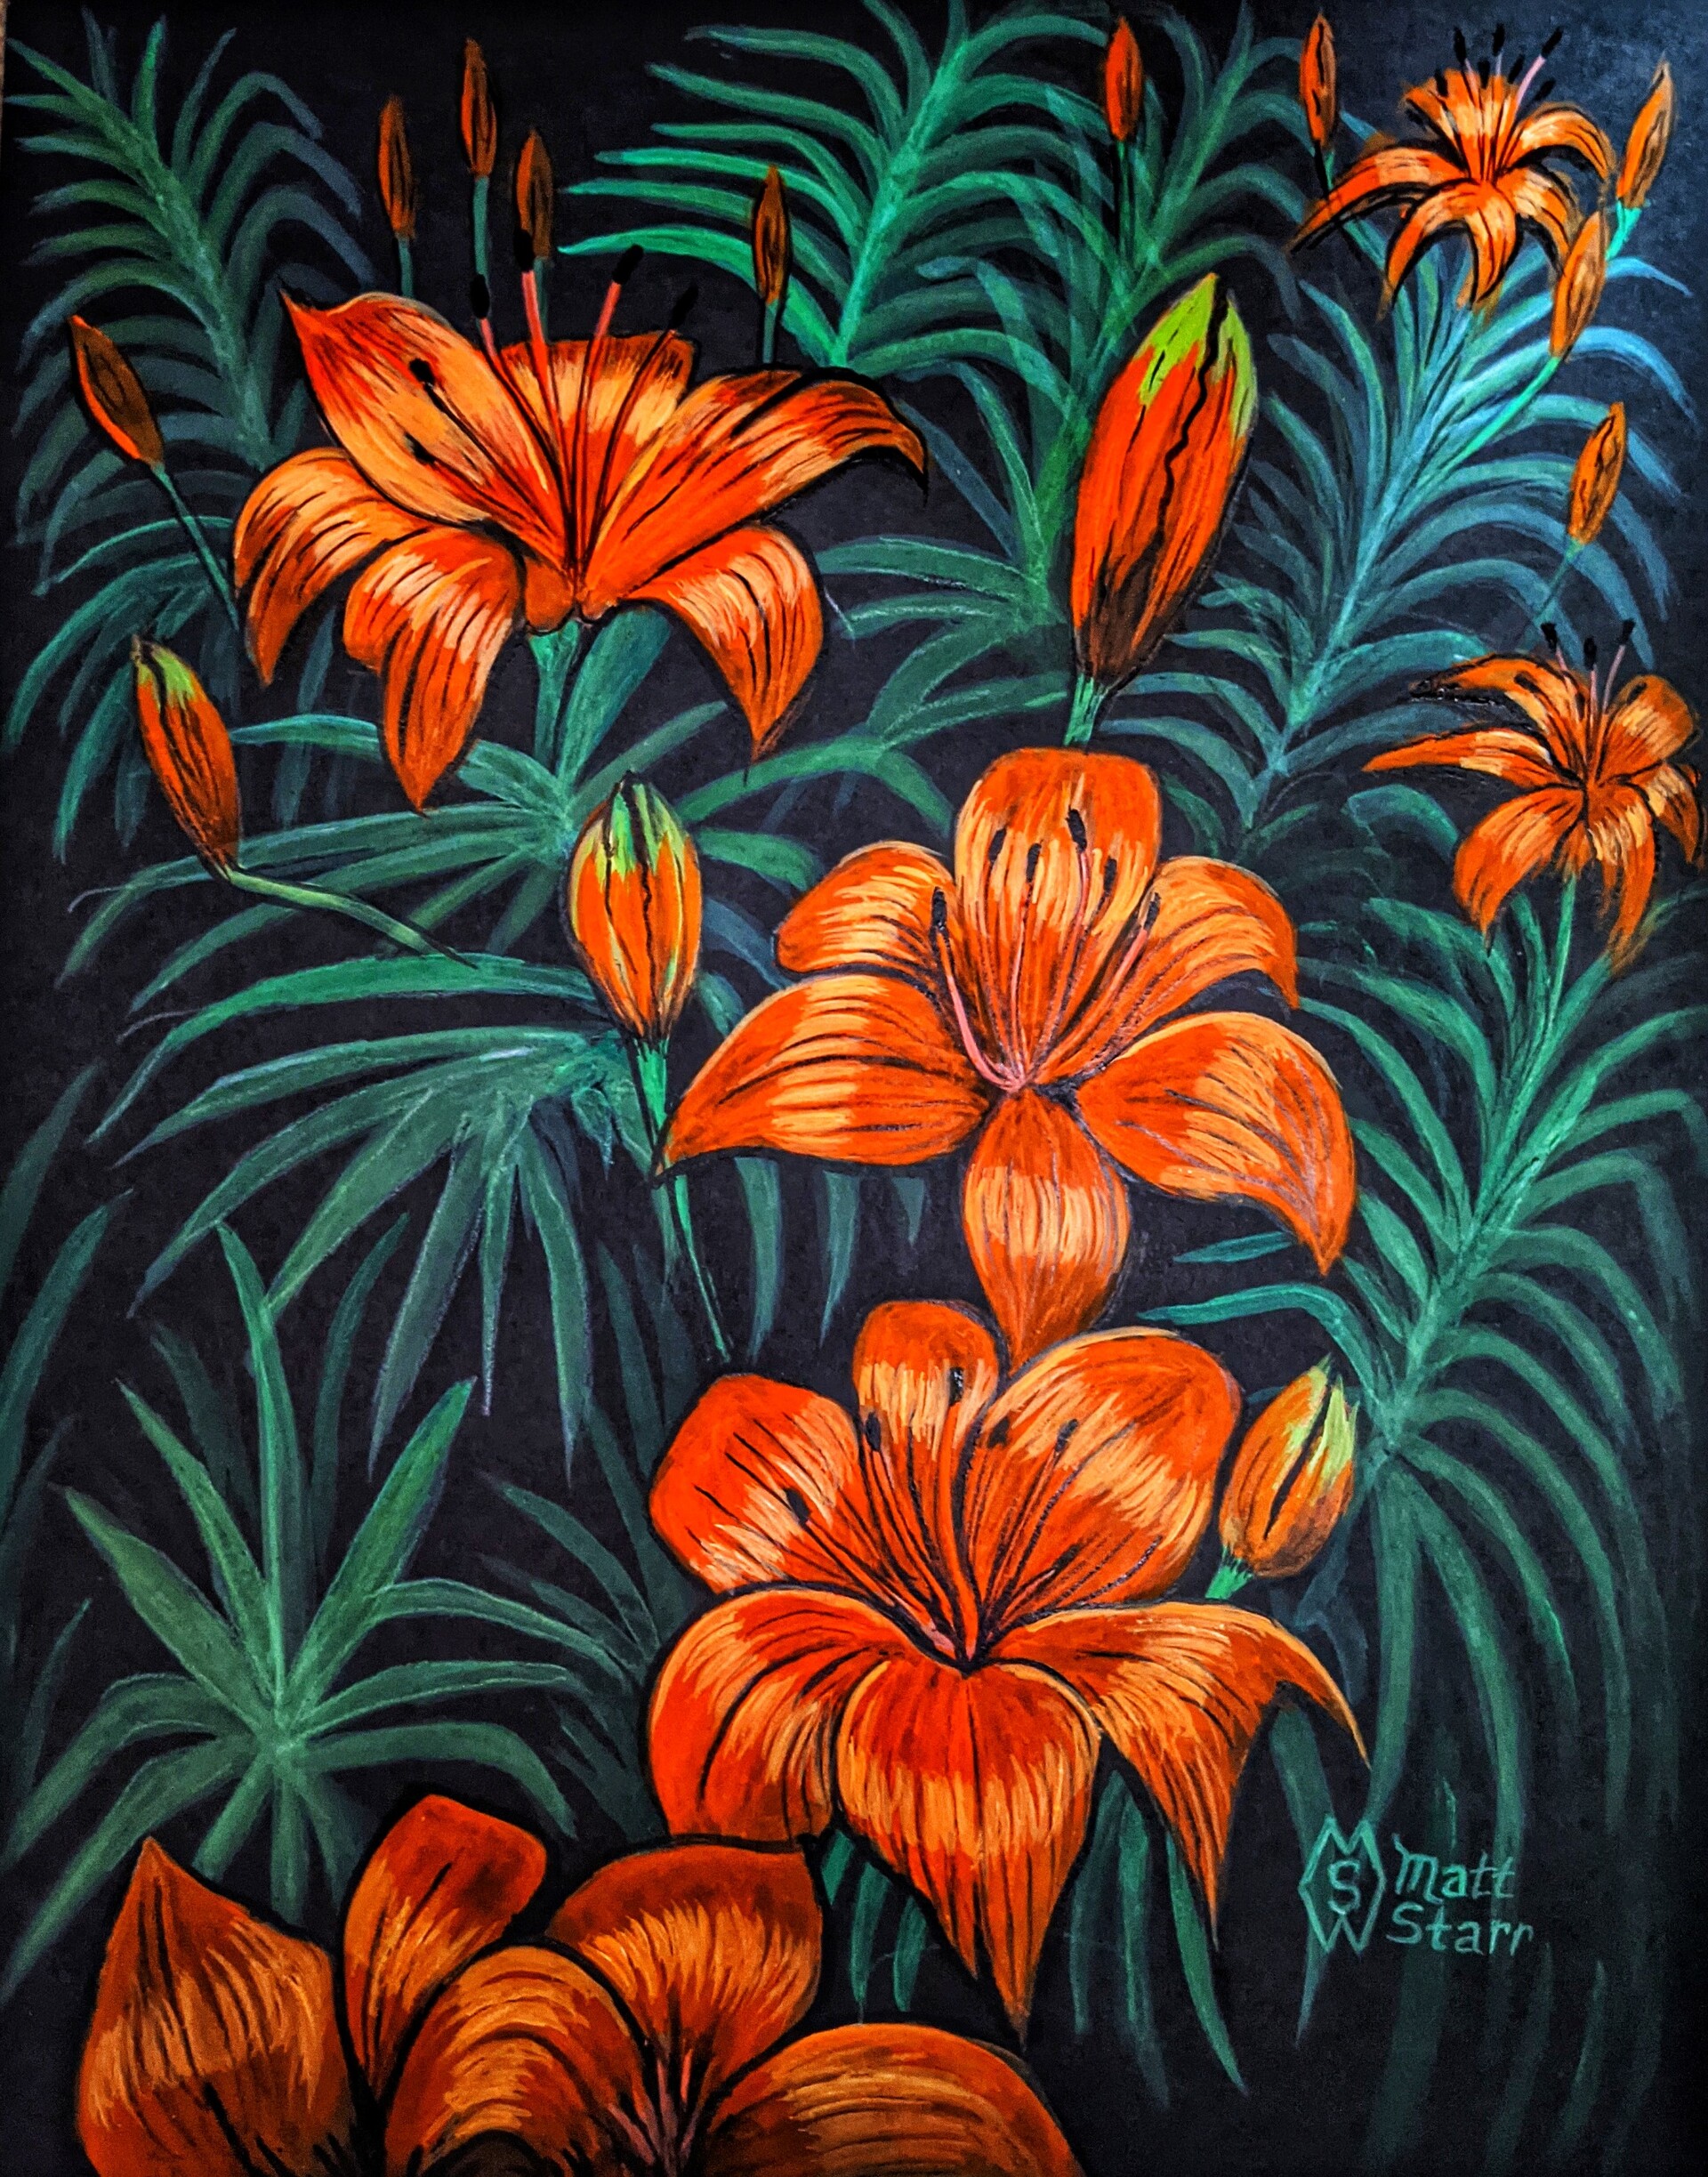 lily flower painting